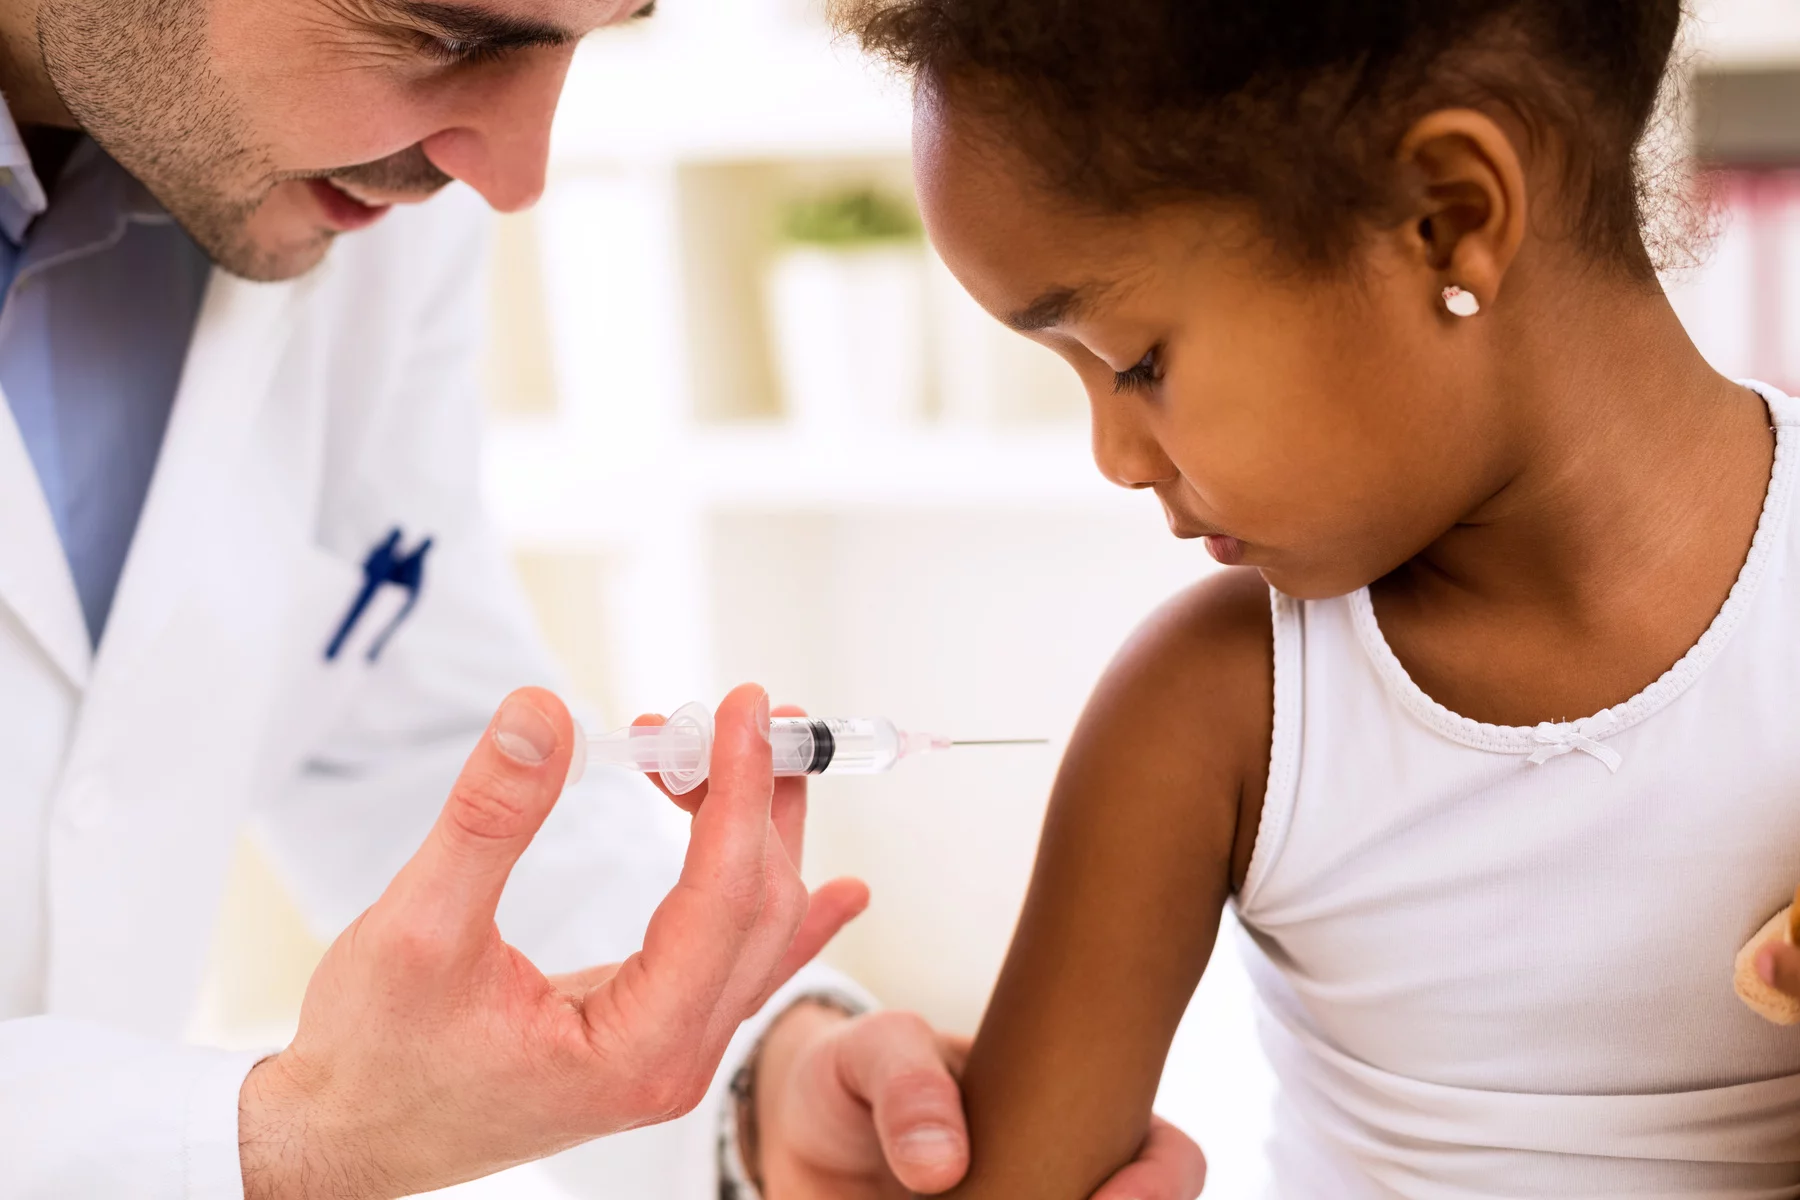 The National Immunization Program provides free child vaccinations in the Netherlands